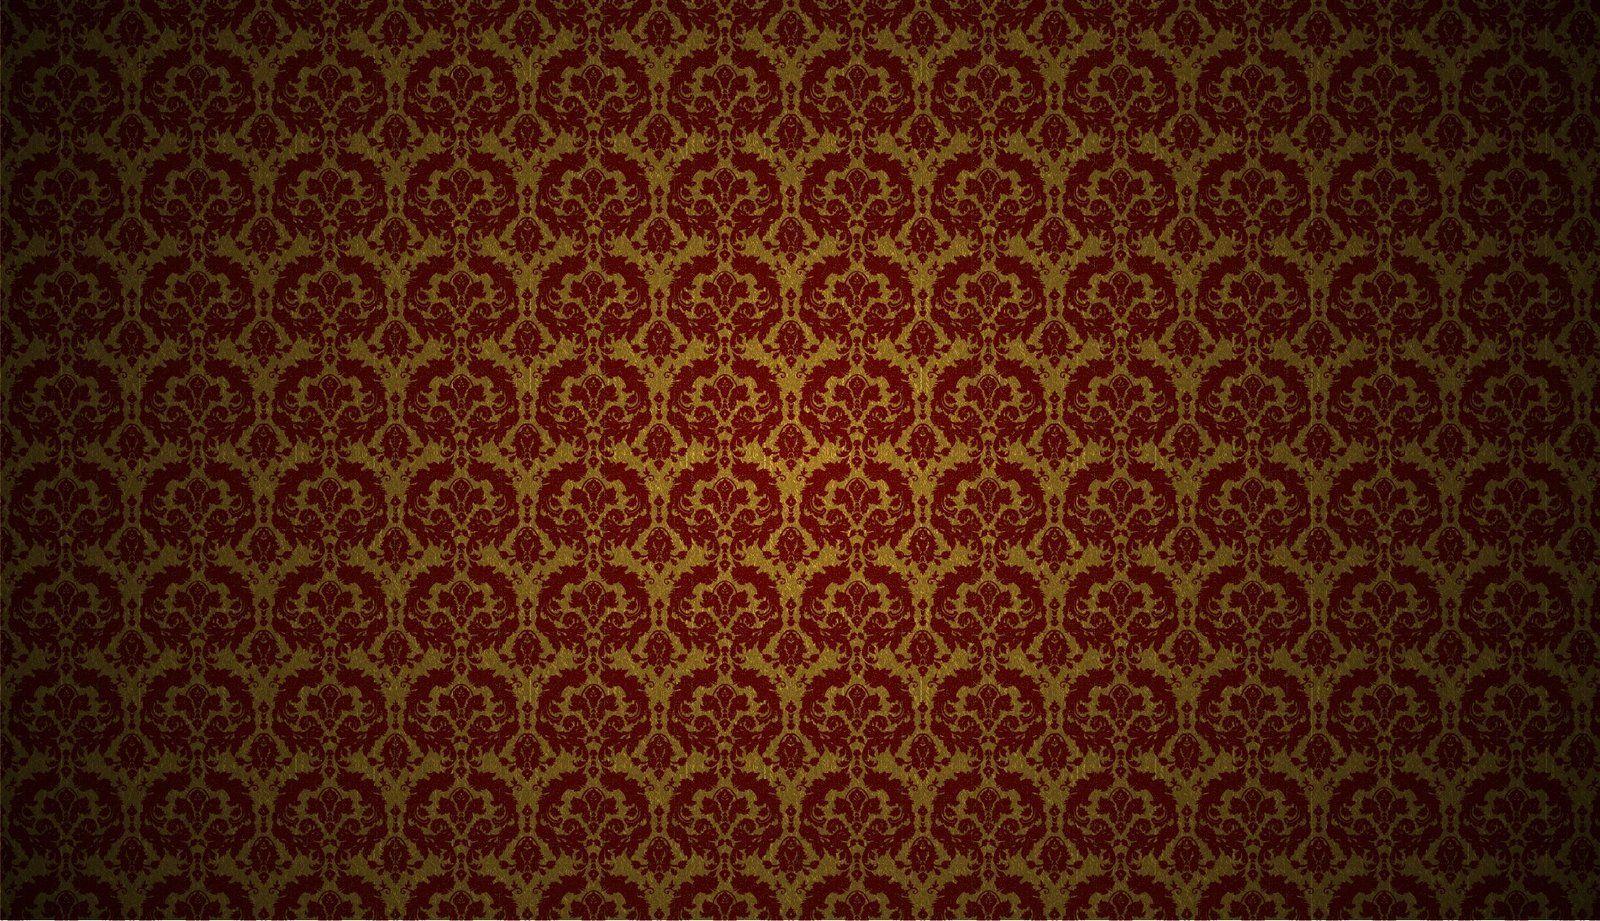 red and gold pattern backgrounds